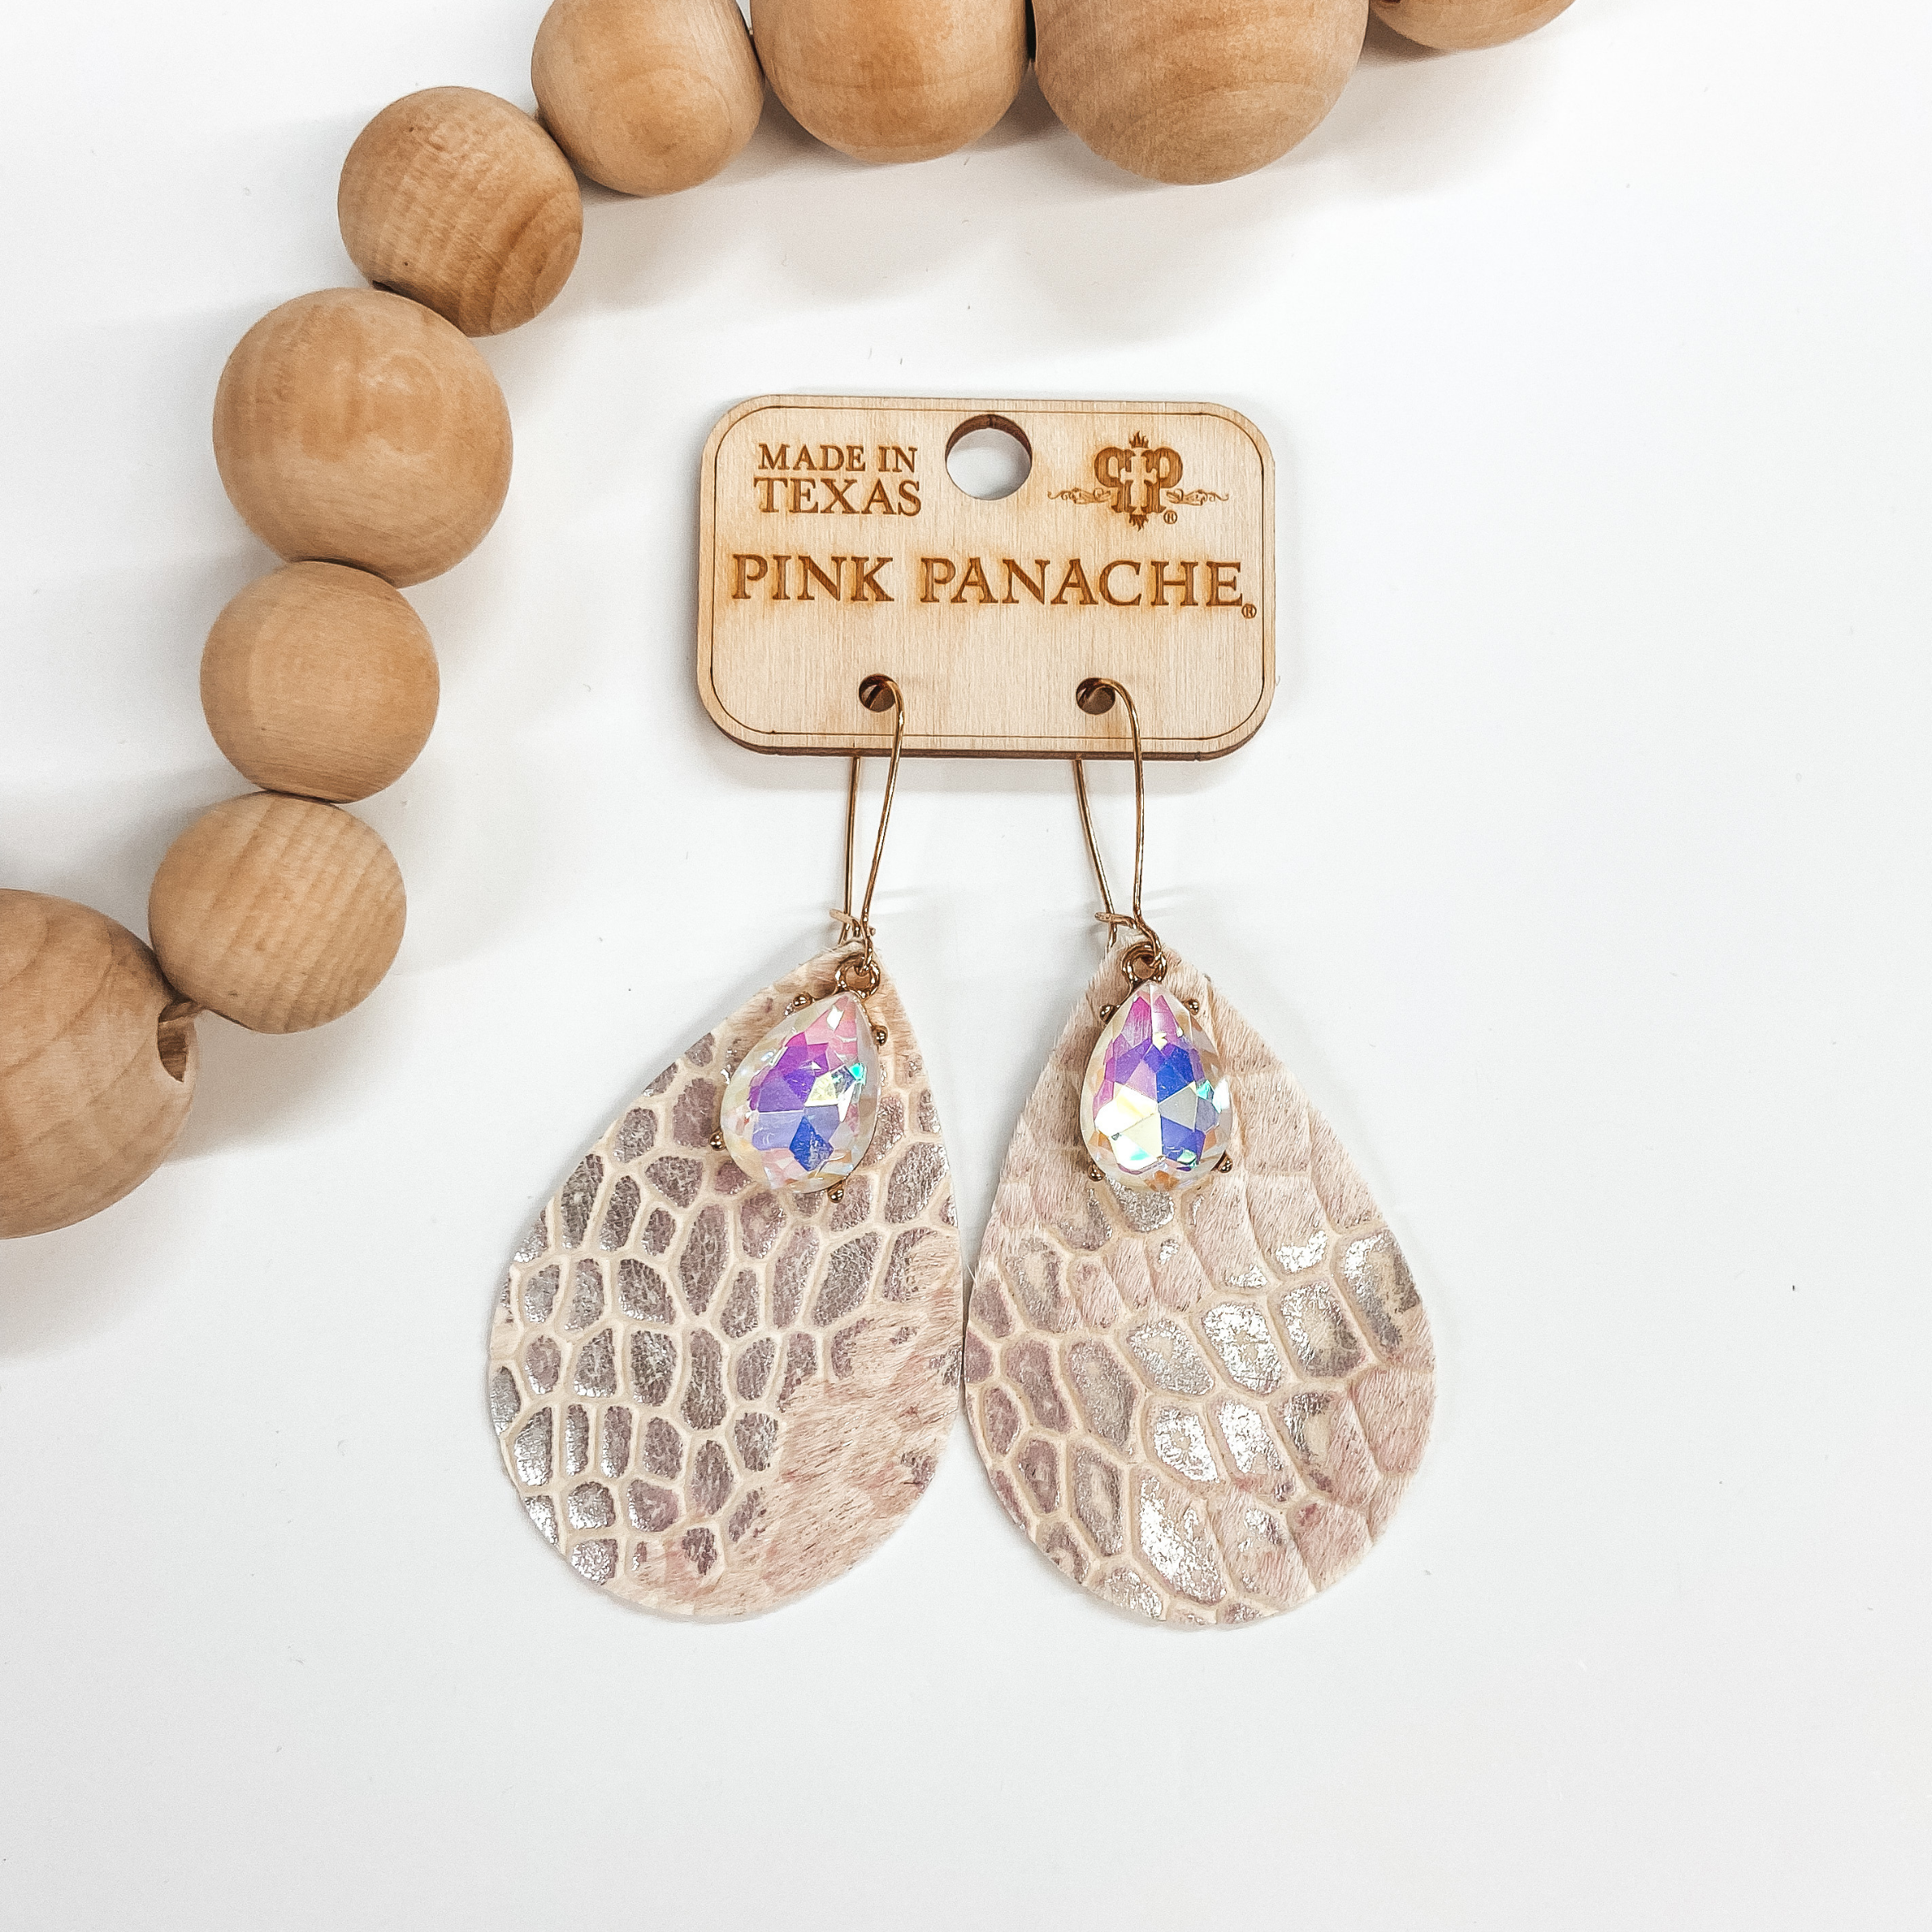 A pair of teardrop shaped earrings that are a white metallic crocodile print. These earrings have a teardrop shape crystal. Pictured on white background with wooden beads.